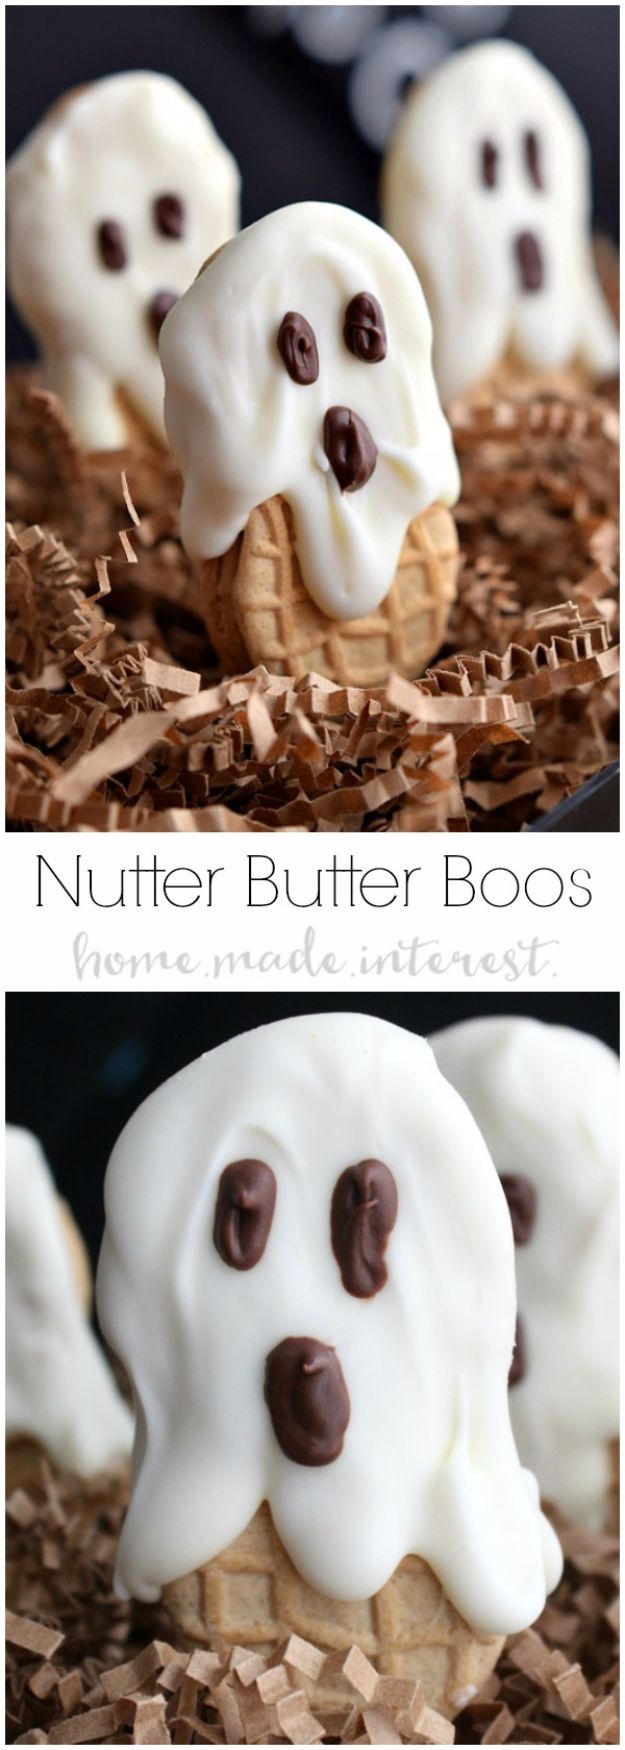 Best Halloween Party Snacks - Nutter Butter Boos - Healthy Ideas for Kids for School, Teens and Adults - Easy and Quick Recipes and Idea for Dips, Chips, Spooky Cookies and Treats - Appetizers and Finger Foods Made With Vegetables, No Candy, Cheap Food, Scary DIY Party Foods With Step by Step Tutorials #halloween #halloweenrecipes #halloweenparty